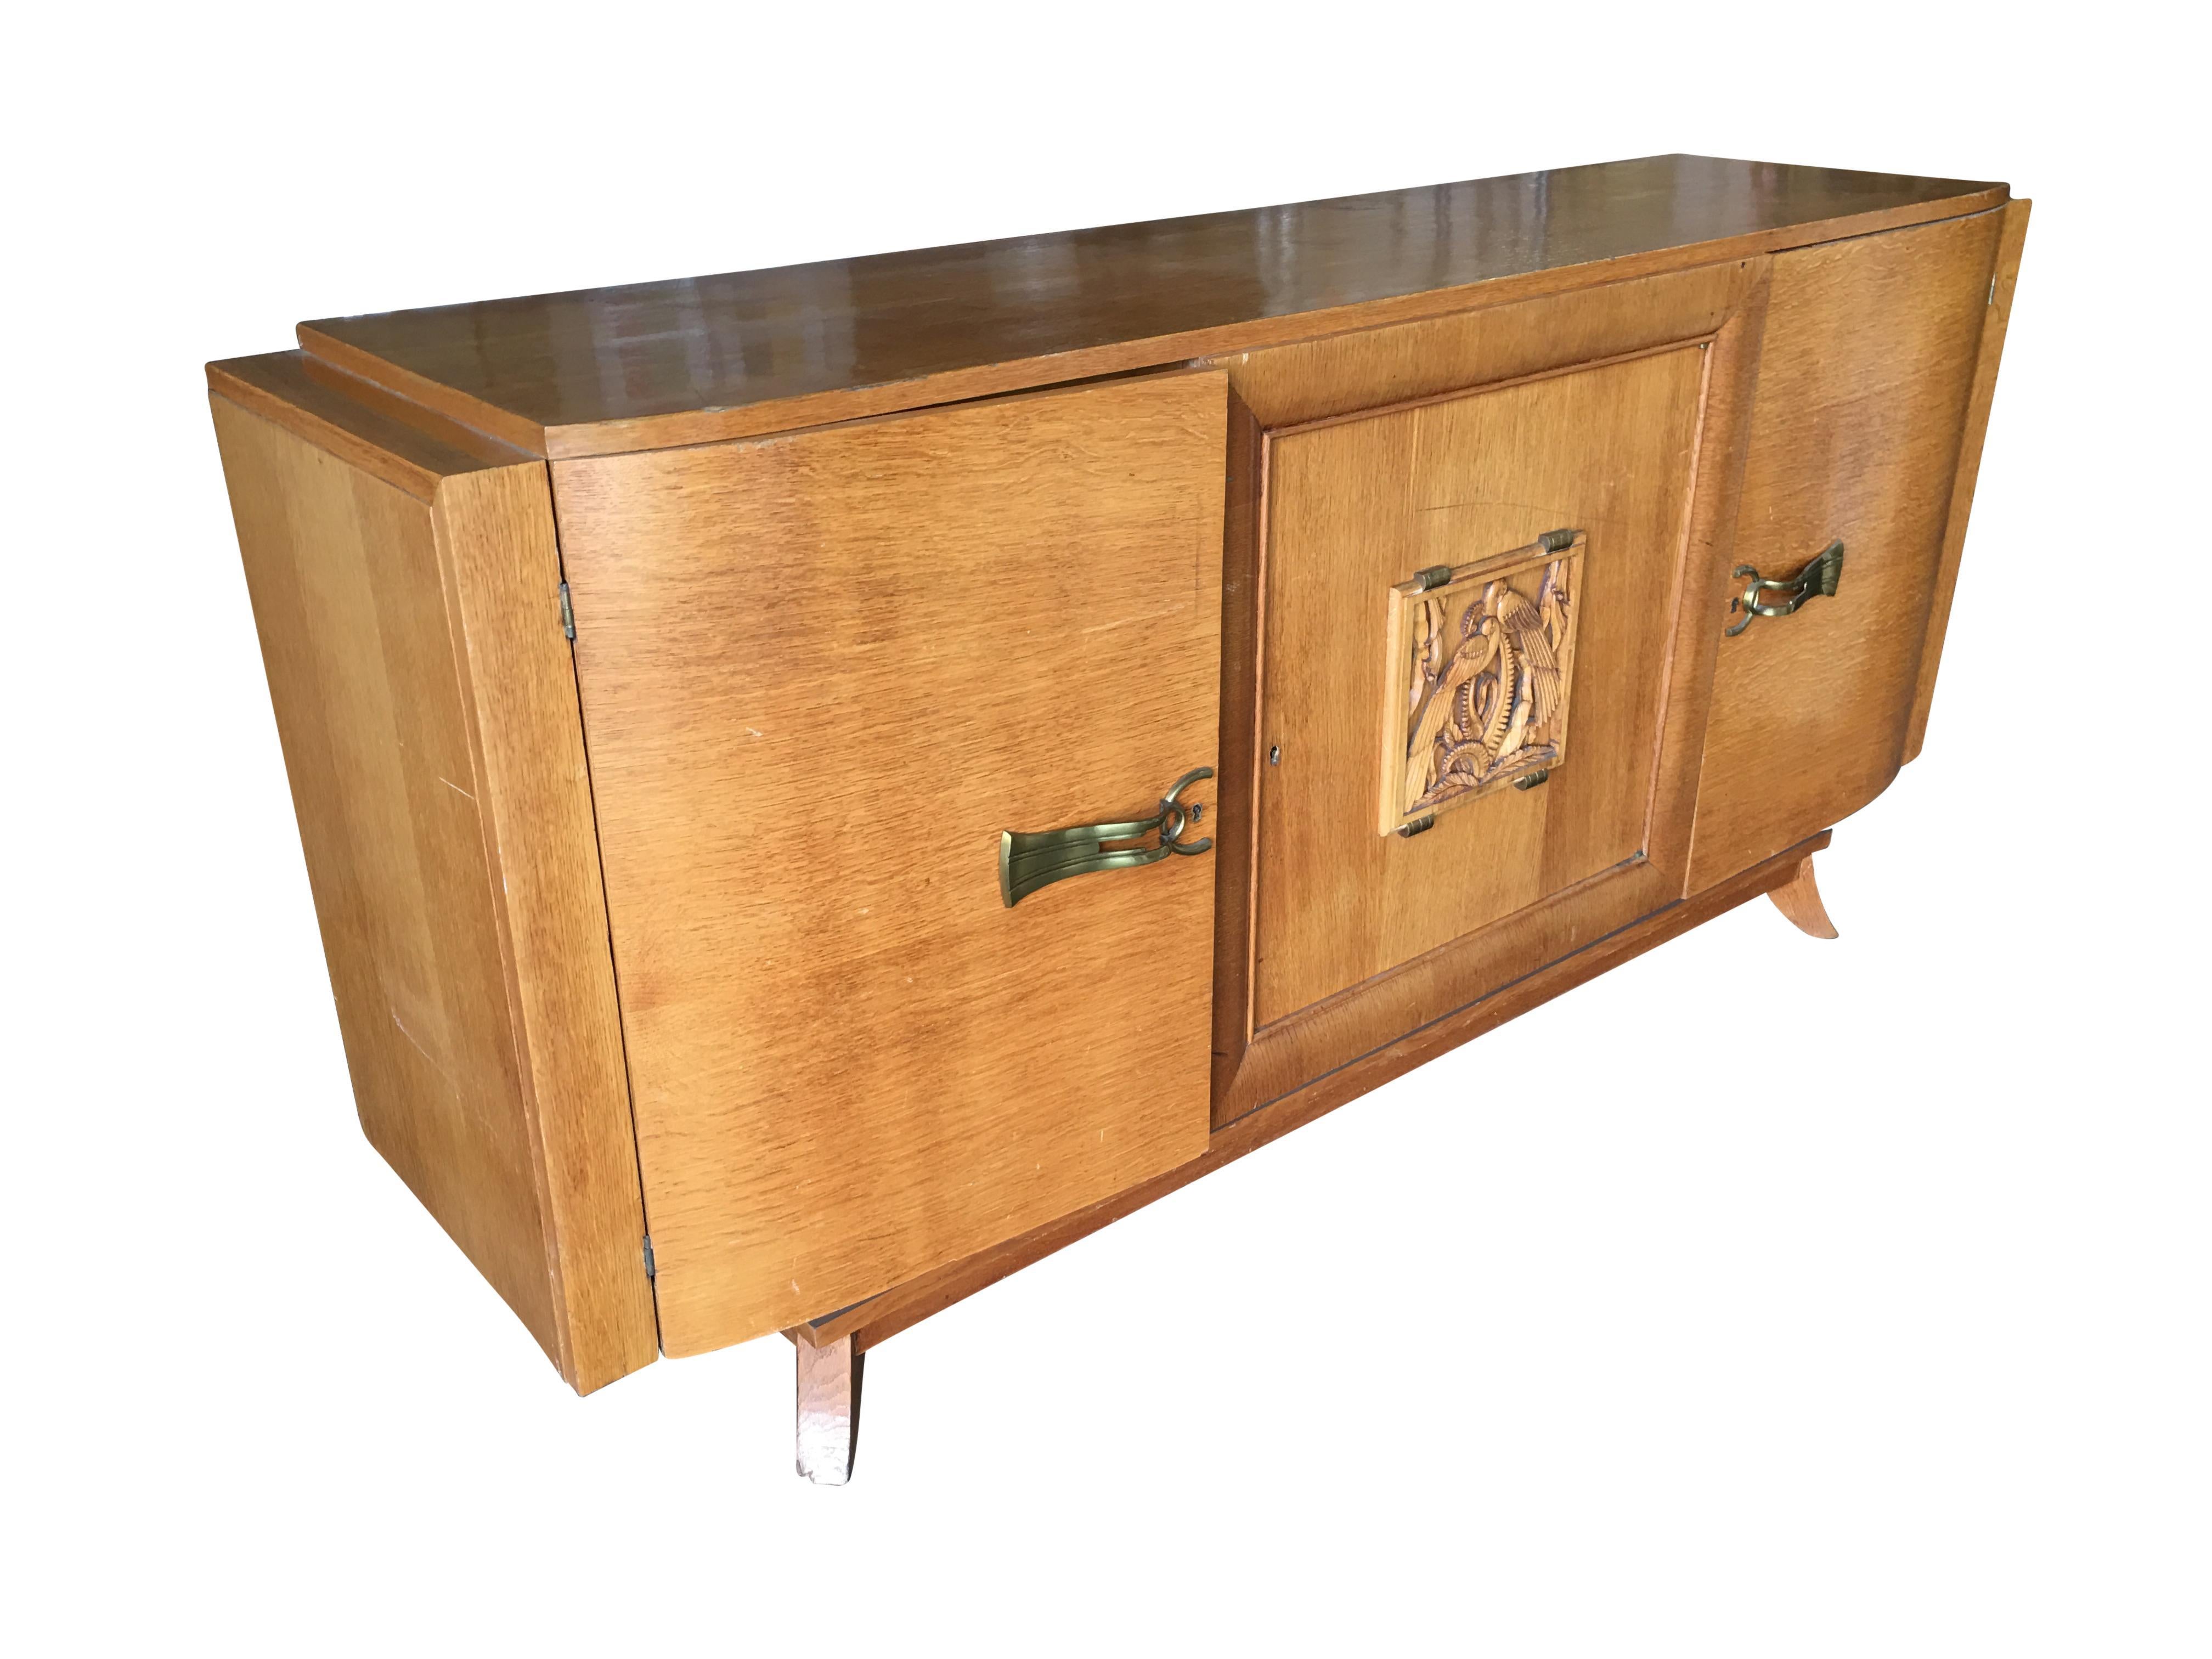 James Mont Style Sideboard with Carved Art Sculpture For Sale 1